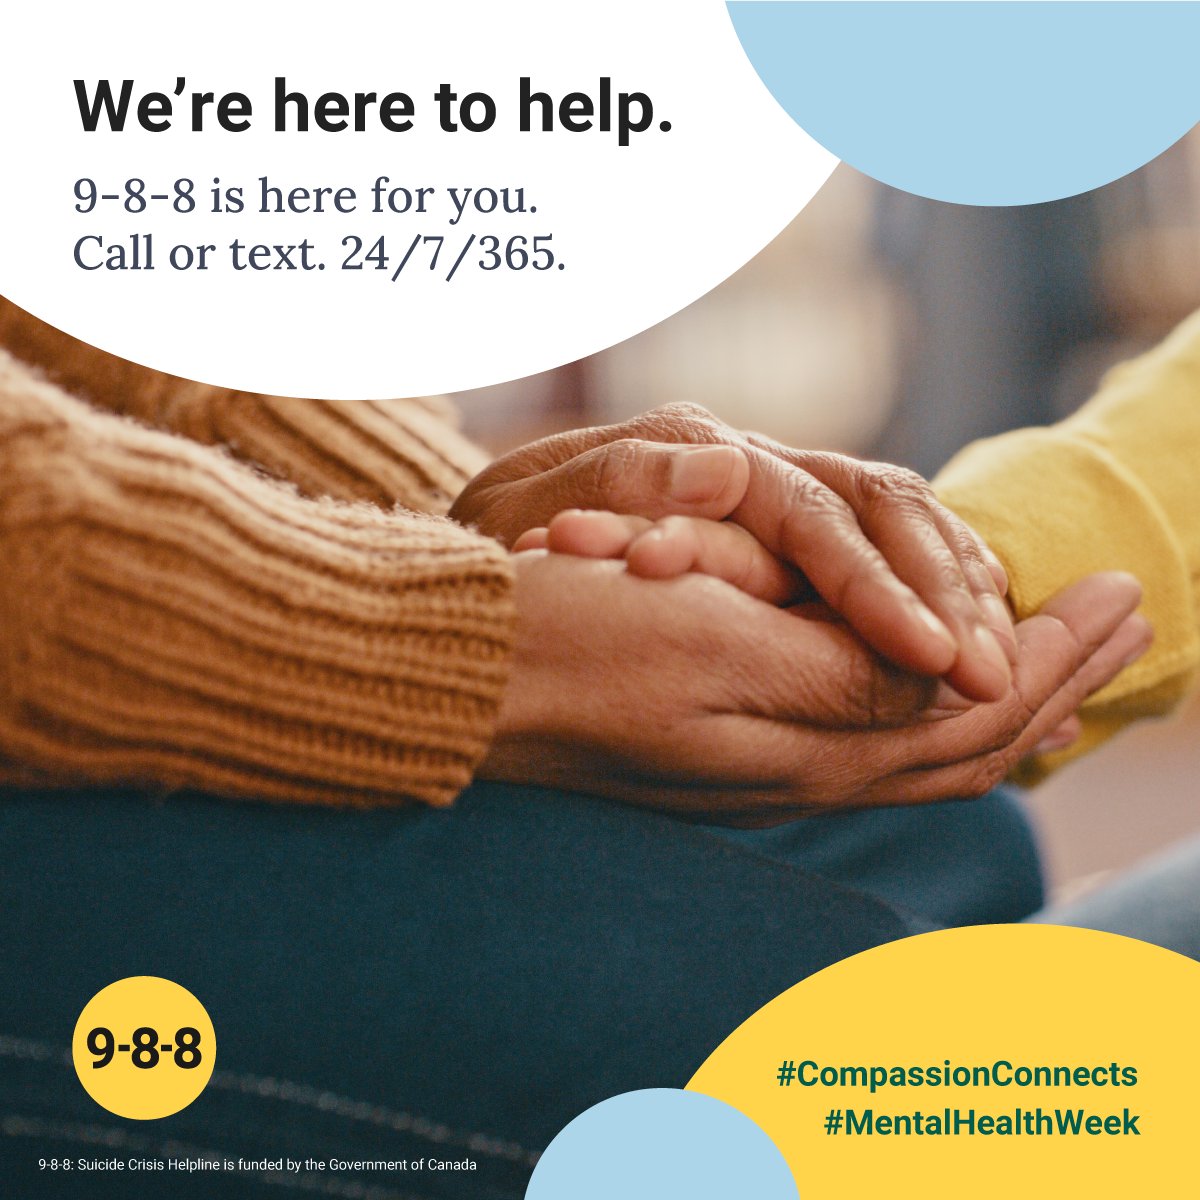 If you or someone you know is struggling, help is available. Reach out for a safe, confidential place to talk or text. #MentalHealthWeek #CompassionConnects